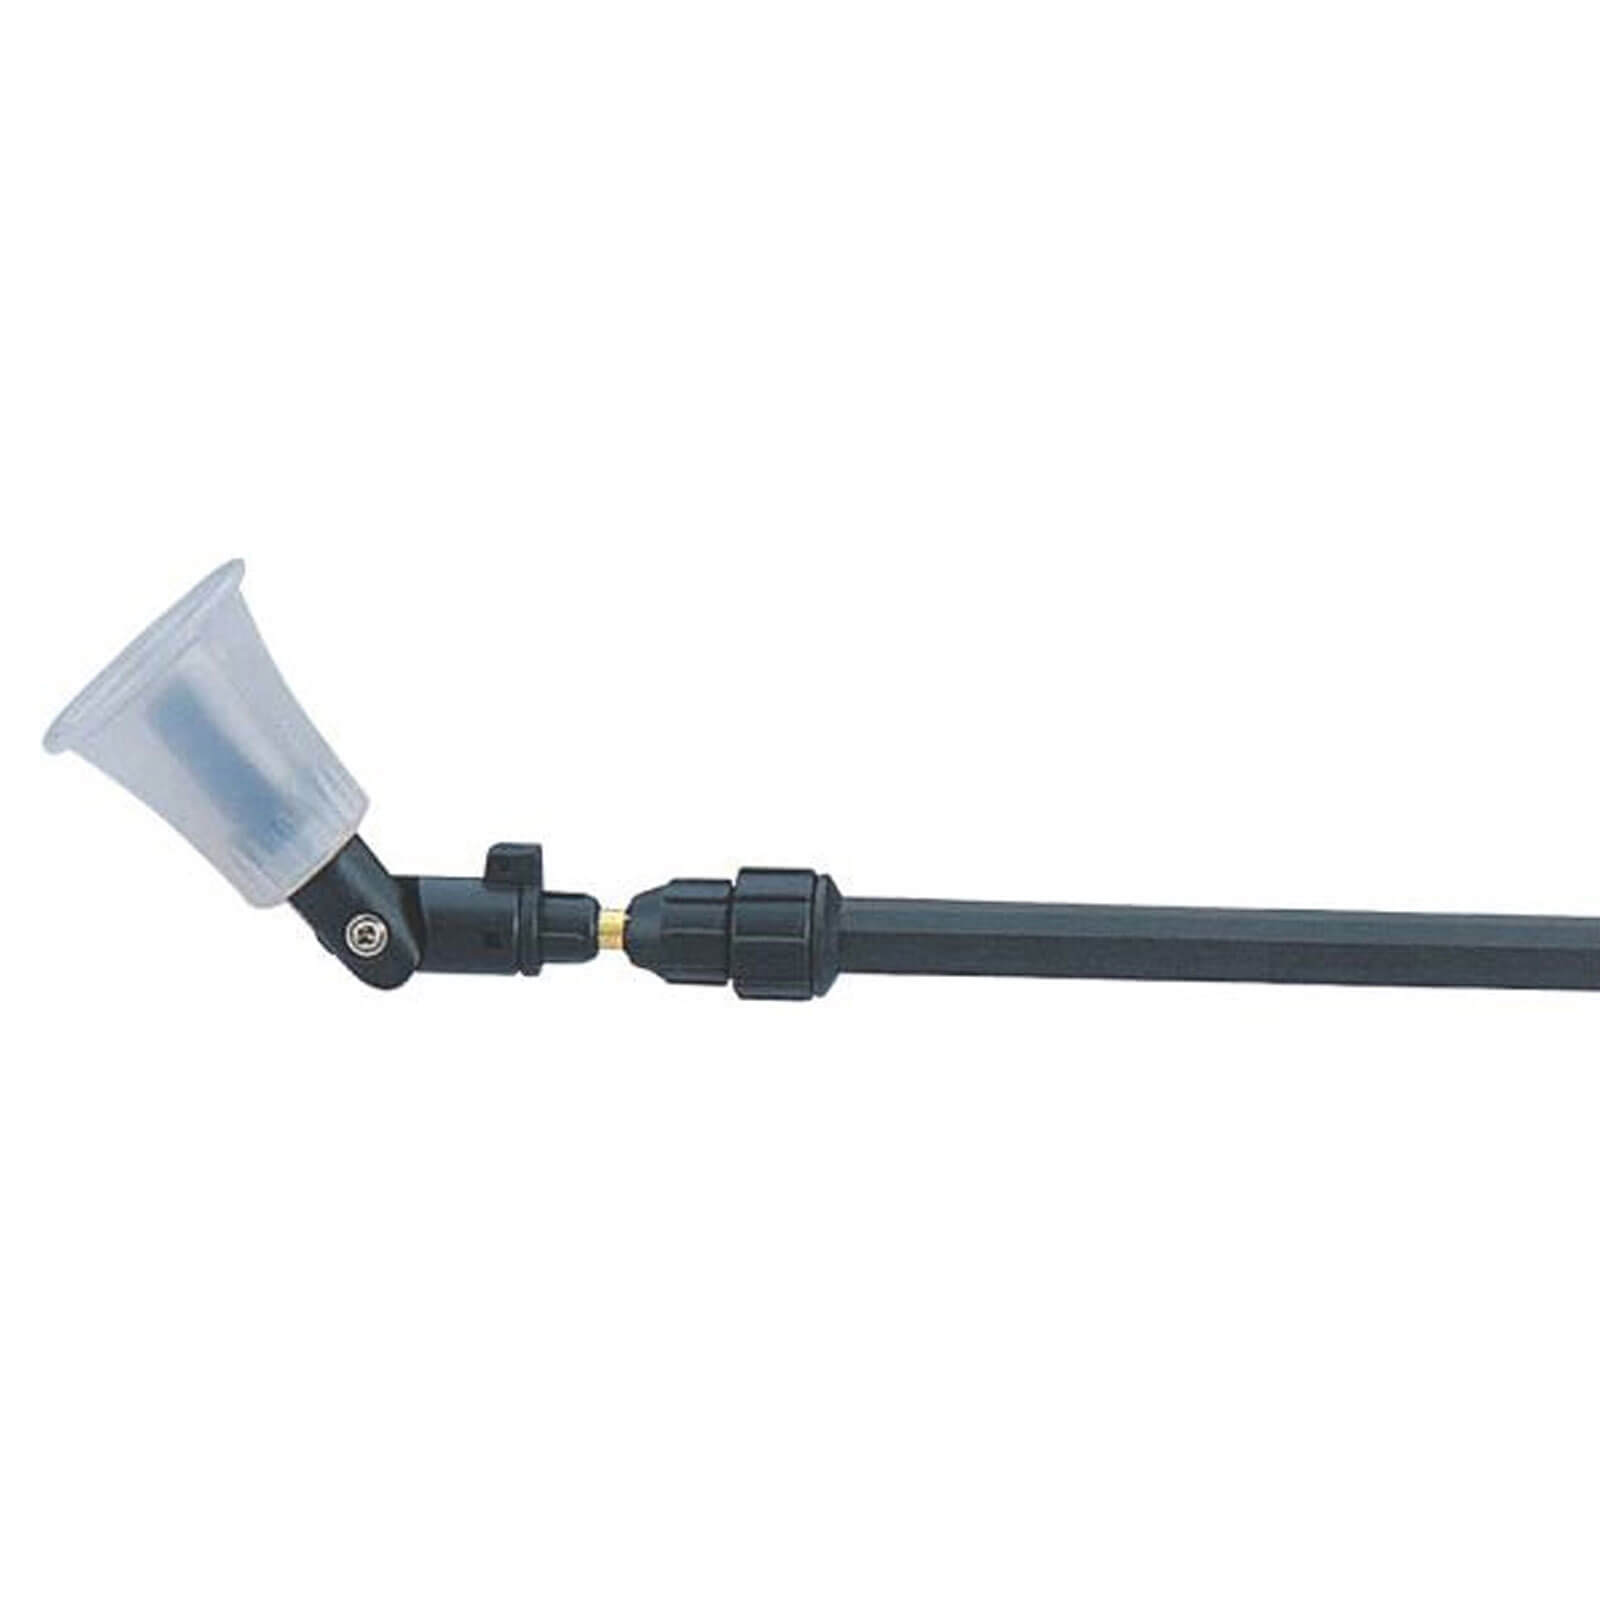 Image of Solo Small Telescopic Lance for 401 and 402 Pressure Sprayers 0.5m